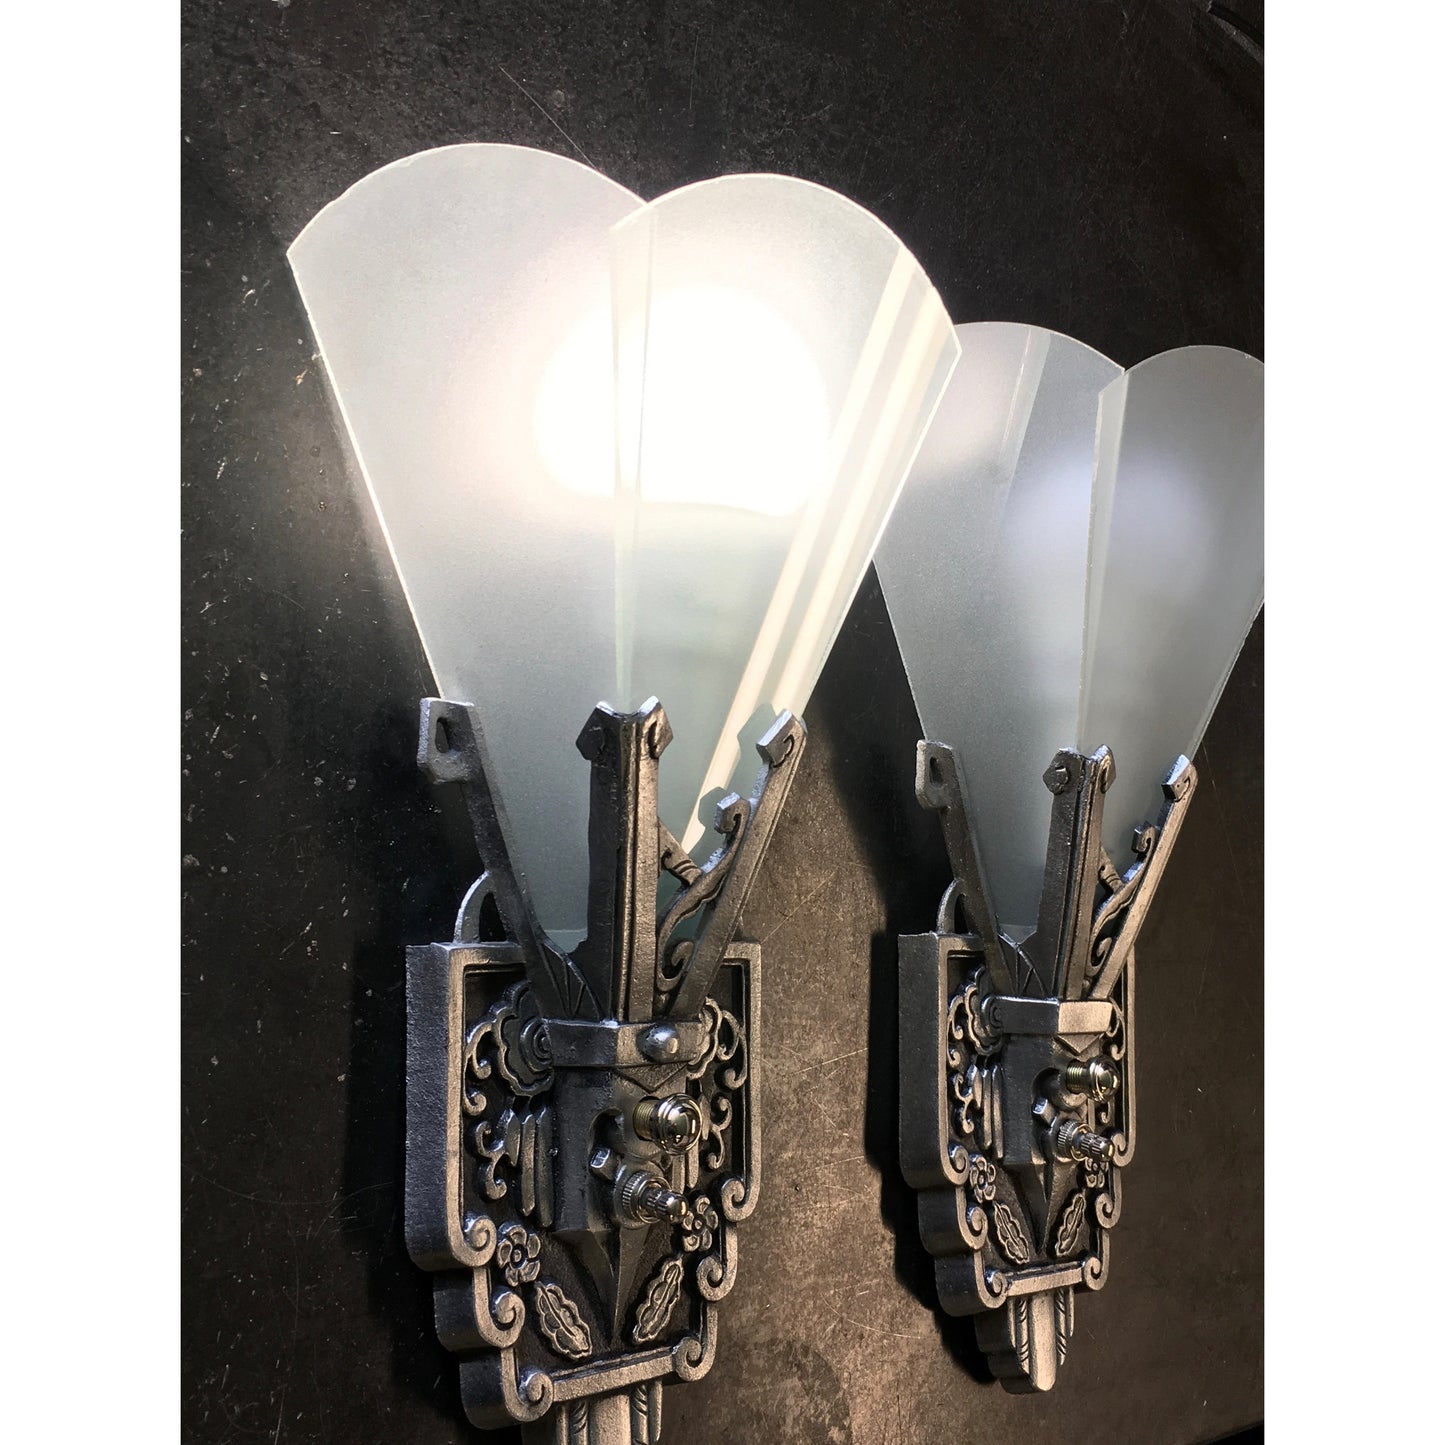 1930s Art Deco Wall Sconces with Flat Panel Glass - Filament Vintage Lighting